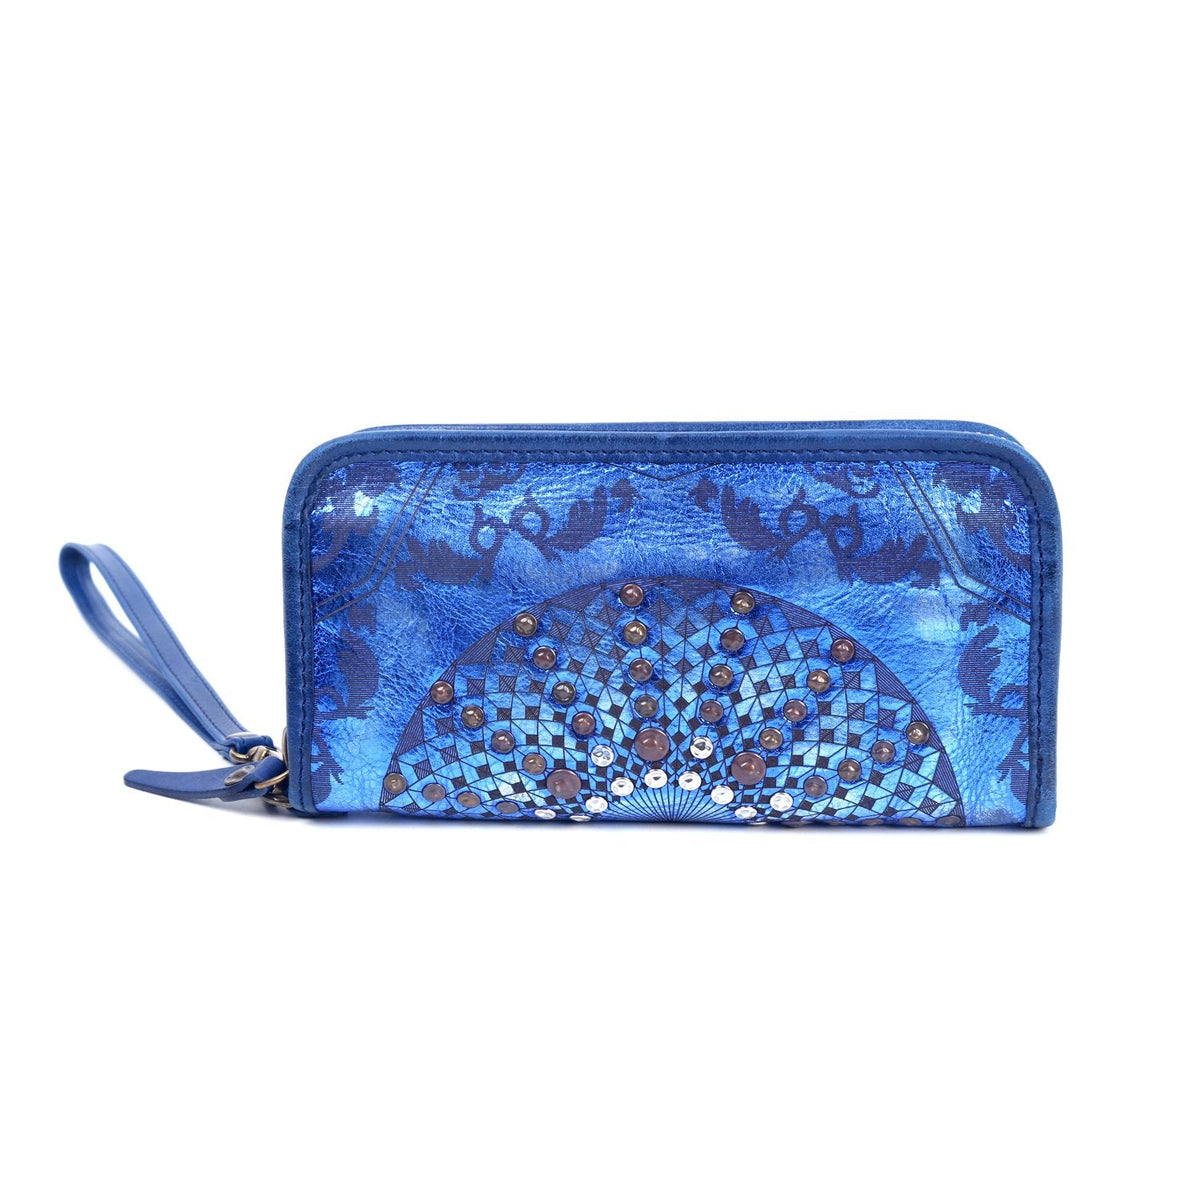 Bags &amp; Luggage - Women&#39;s Bags - Clutches Golden Mola Leather Clutch